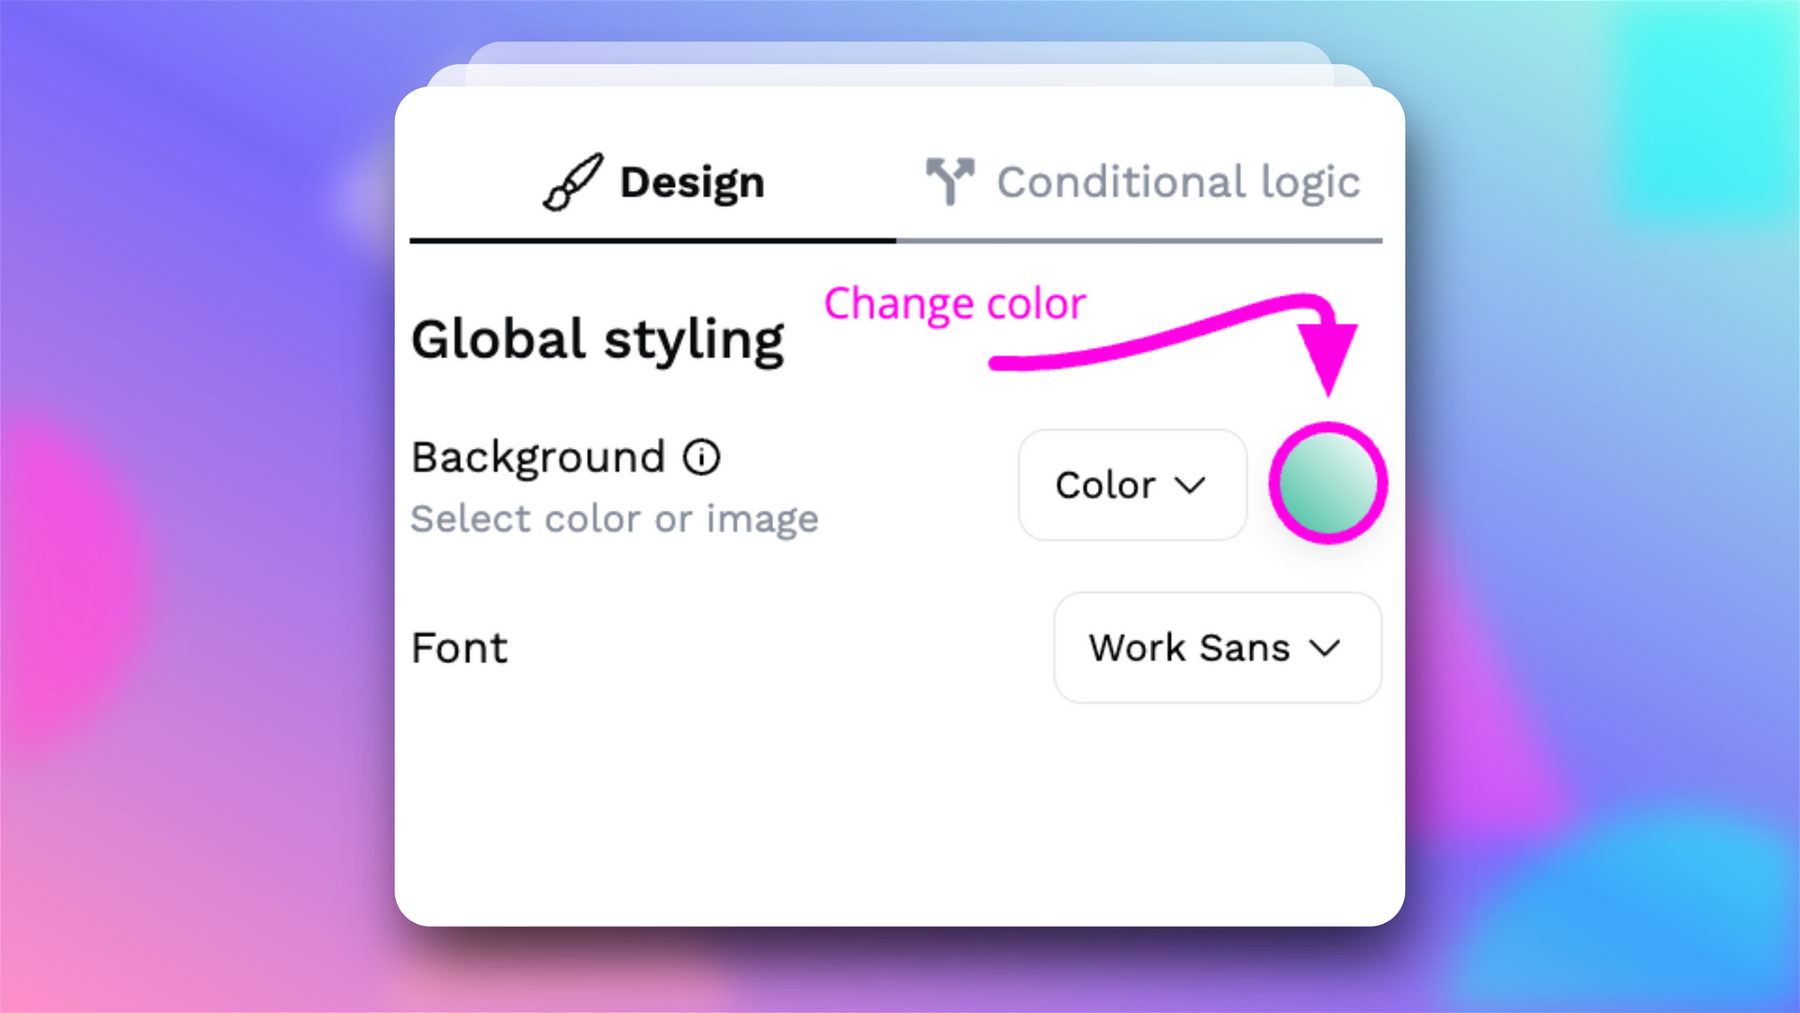 The very first option under the global styling options beneath the design tab includes the ability to change the background color and image.